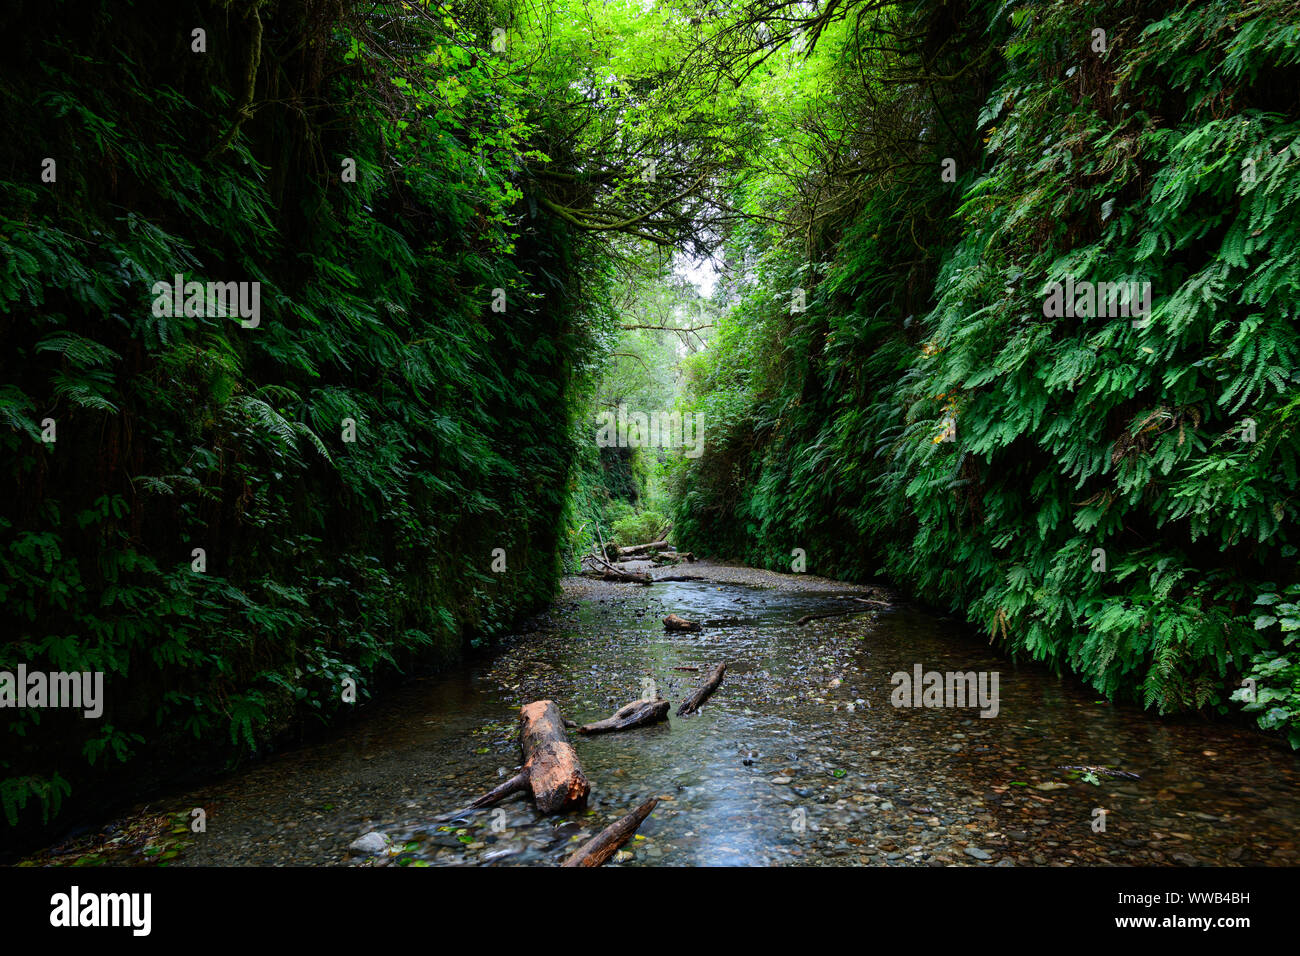 The lush trails and riverbed of Fern Canyon inside the Prairie Creek Redwoods State Park in California, where part of Jurrasic Park 2, The Lost World Stock Photo